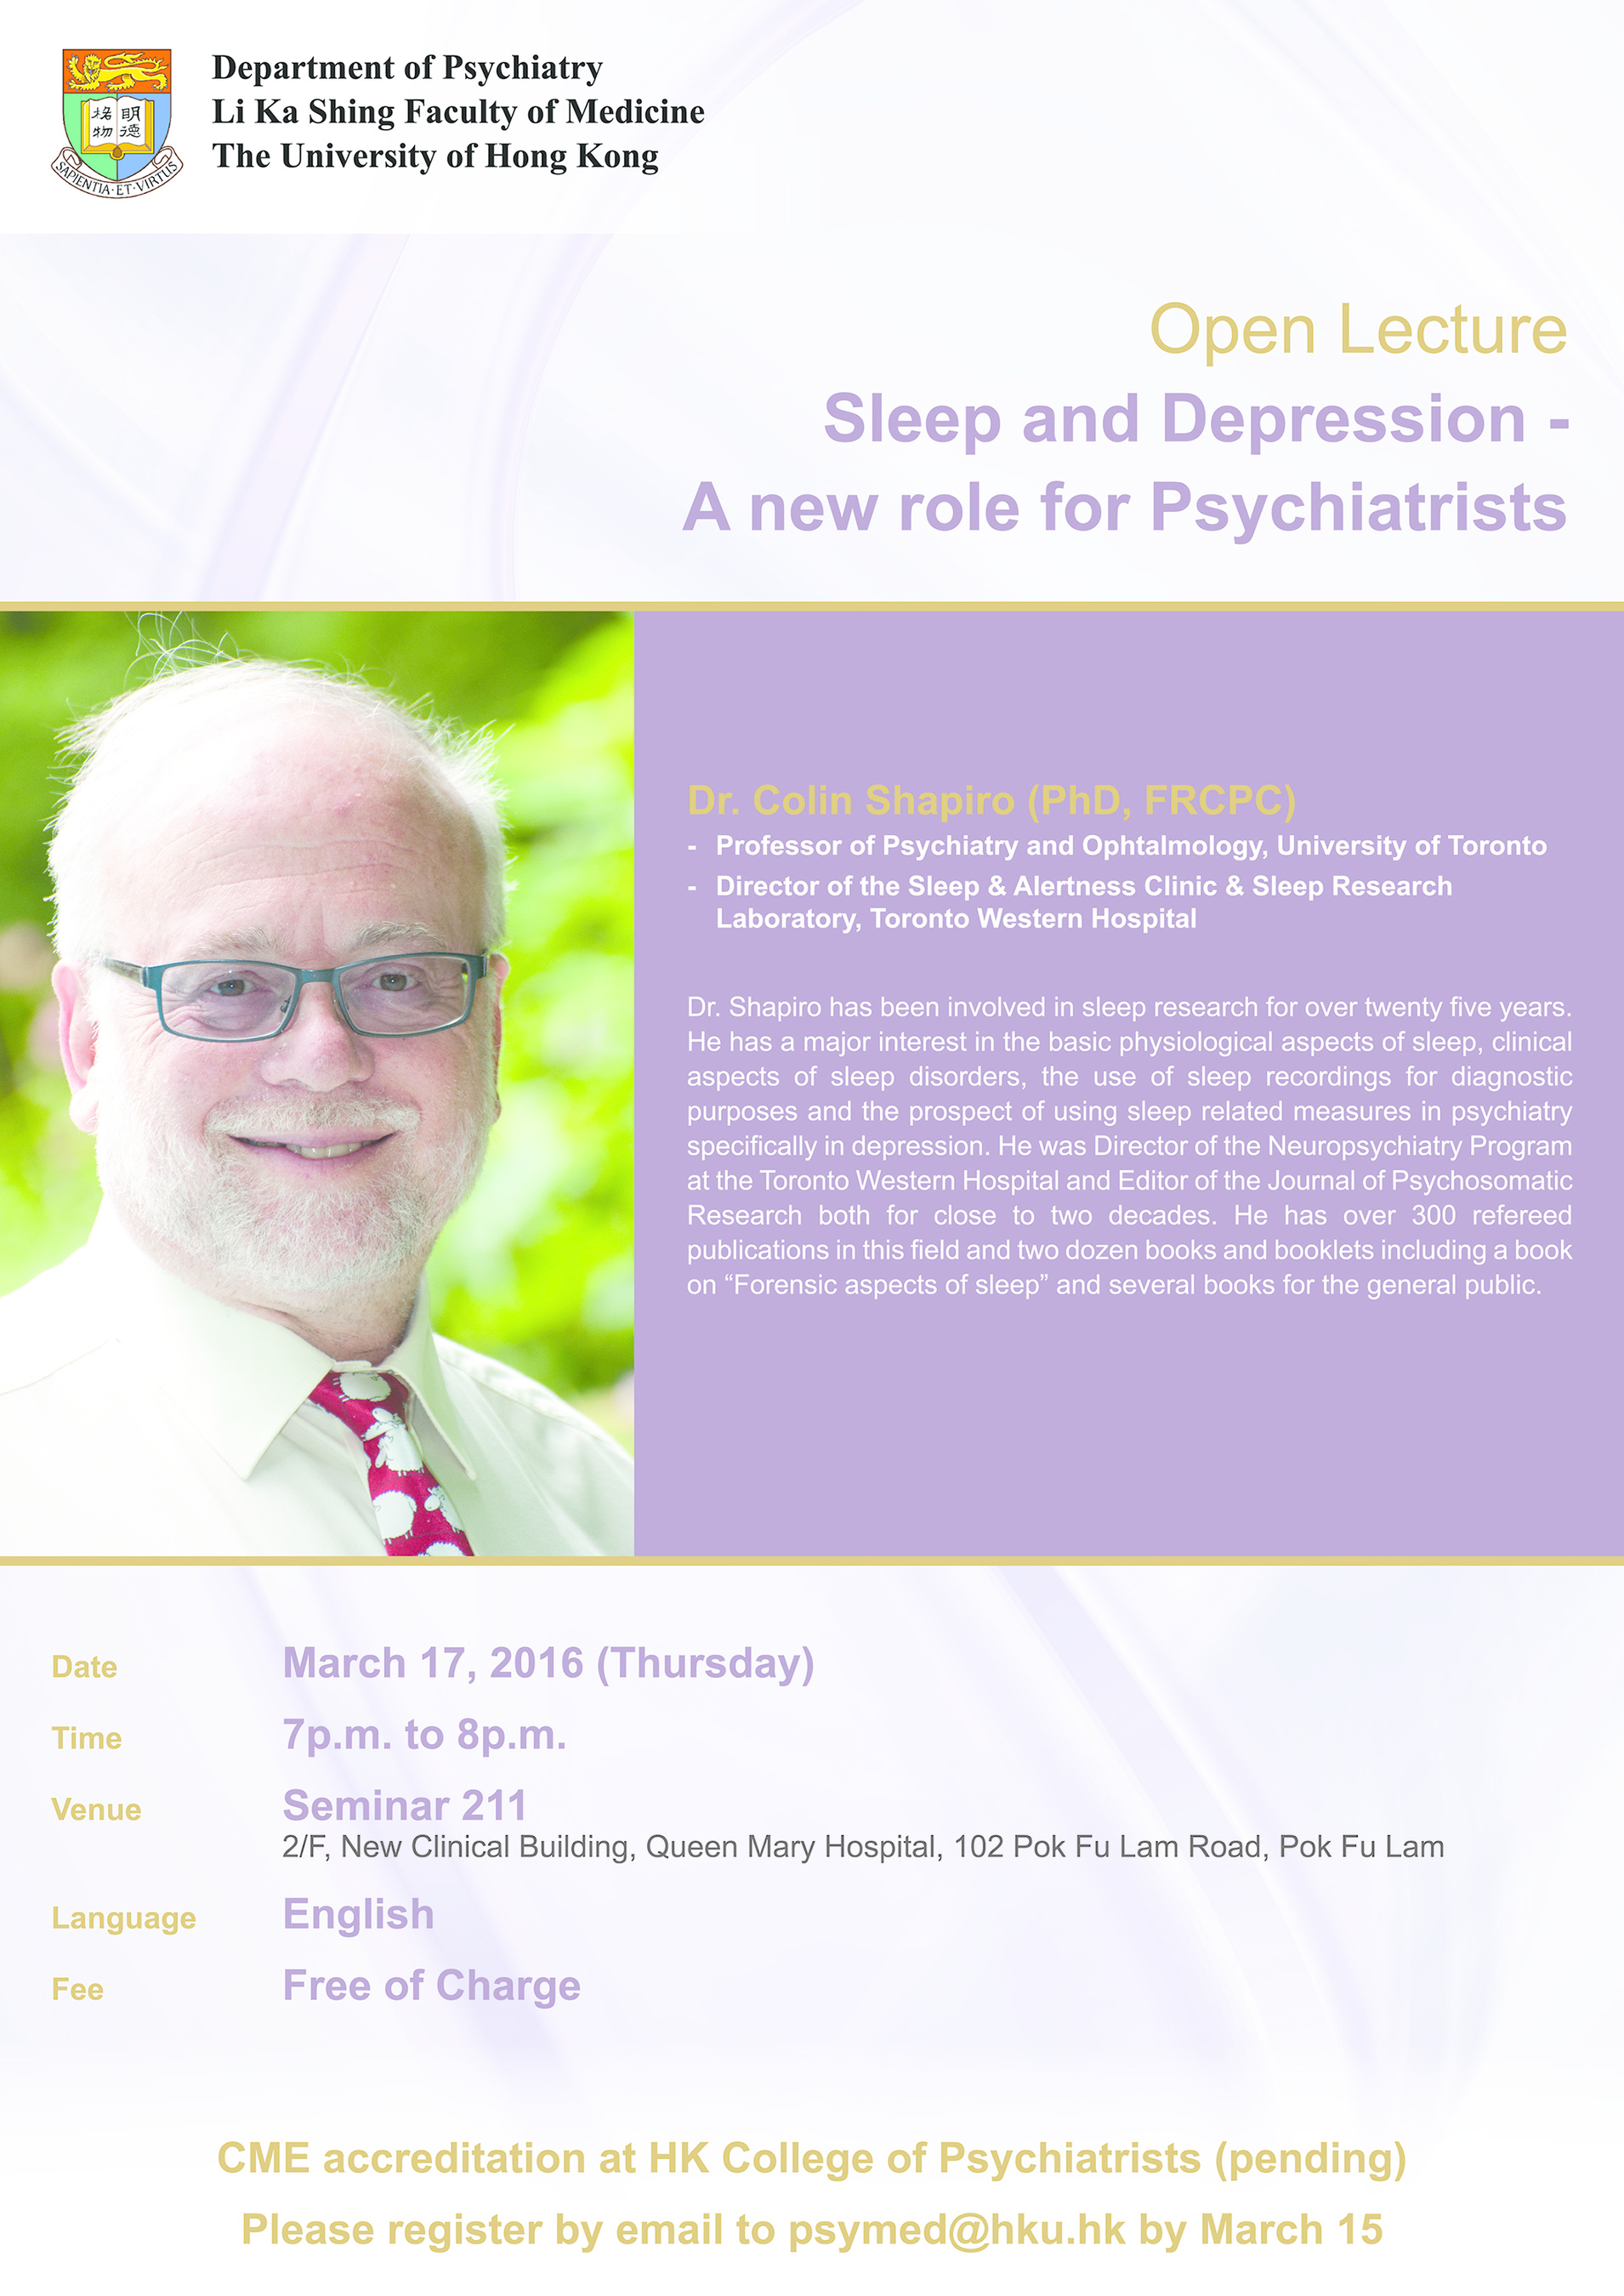 Open Lecture on March 17 by Dr Colin Shapiro (HKU Department of Psychiatry)